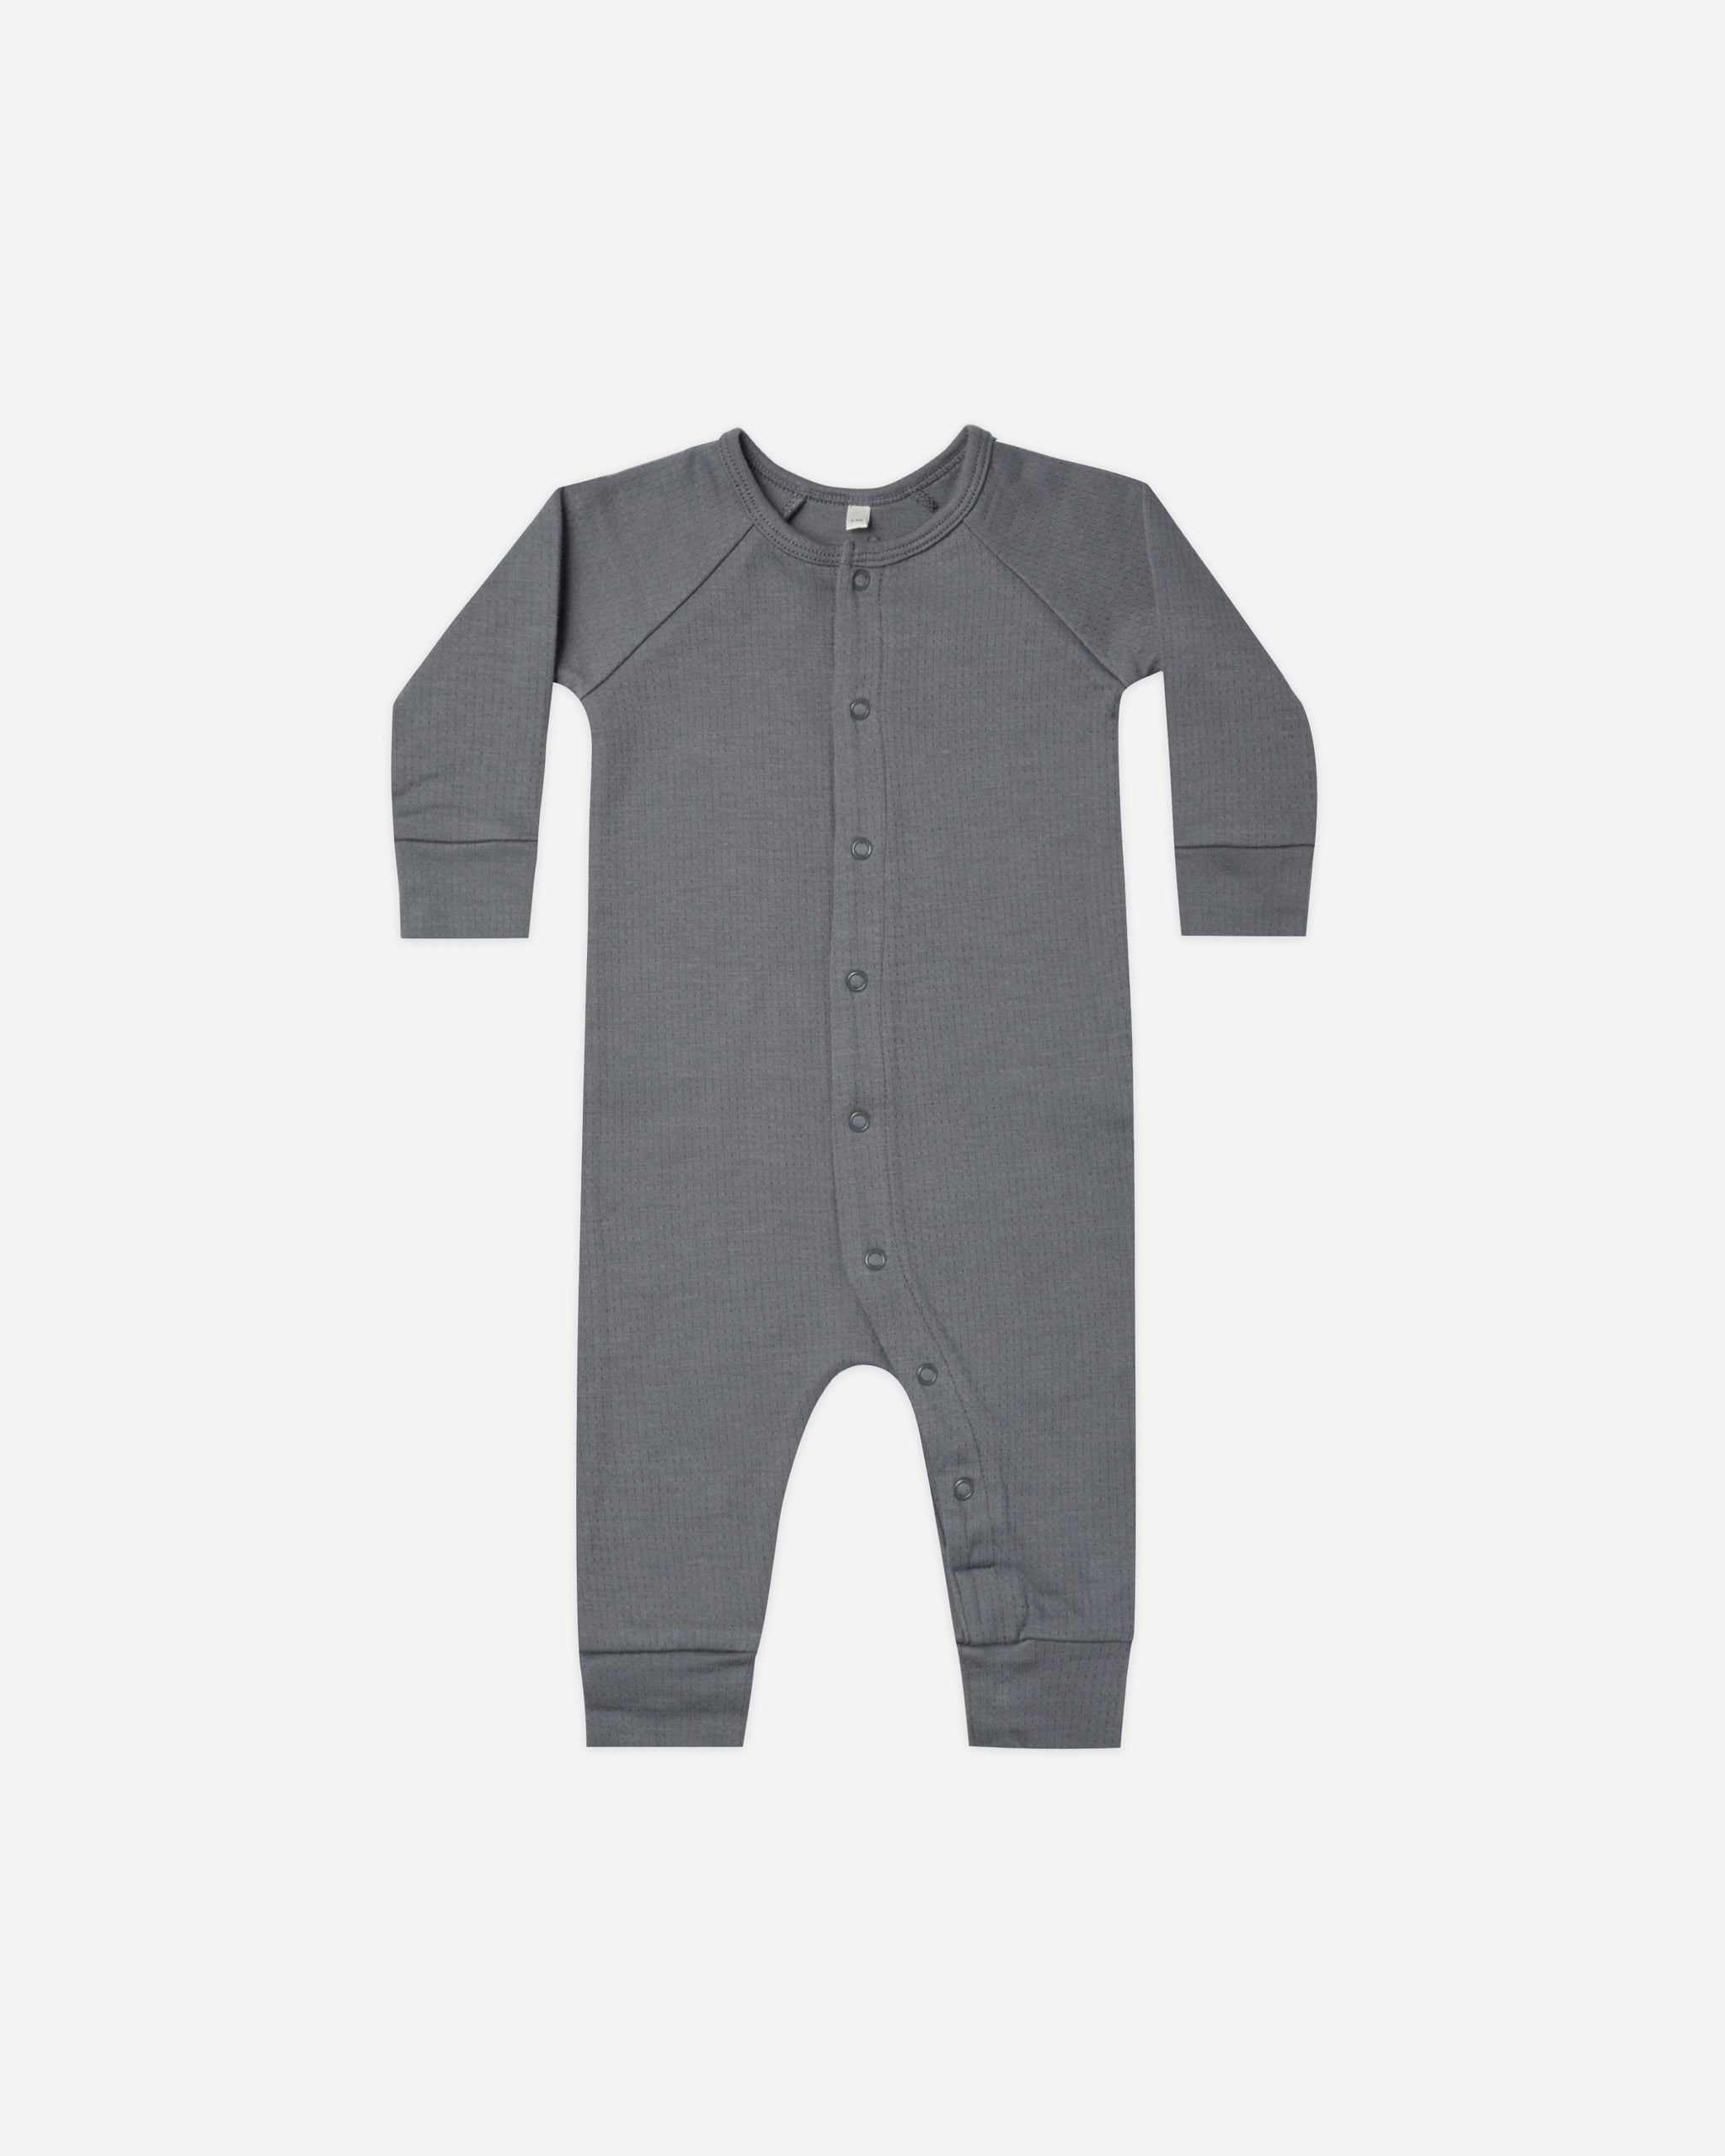 Pointelle Long John || Navy - Rylee + Cru | Kids Clothes | Trendy Baby Clothes | Modern Infant Outfits |